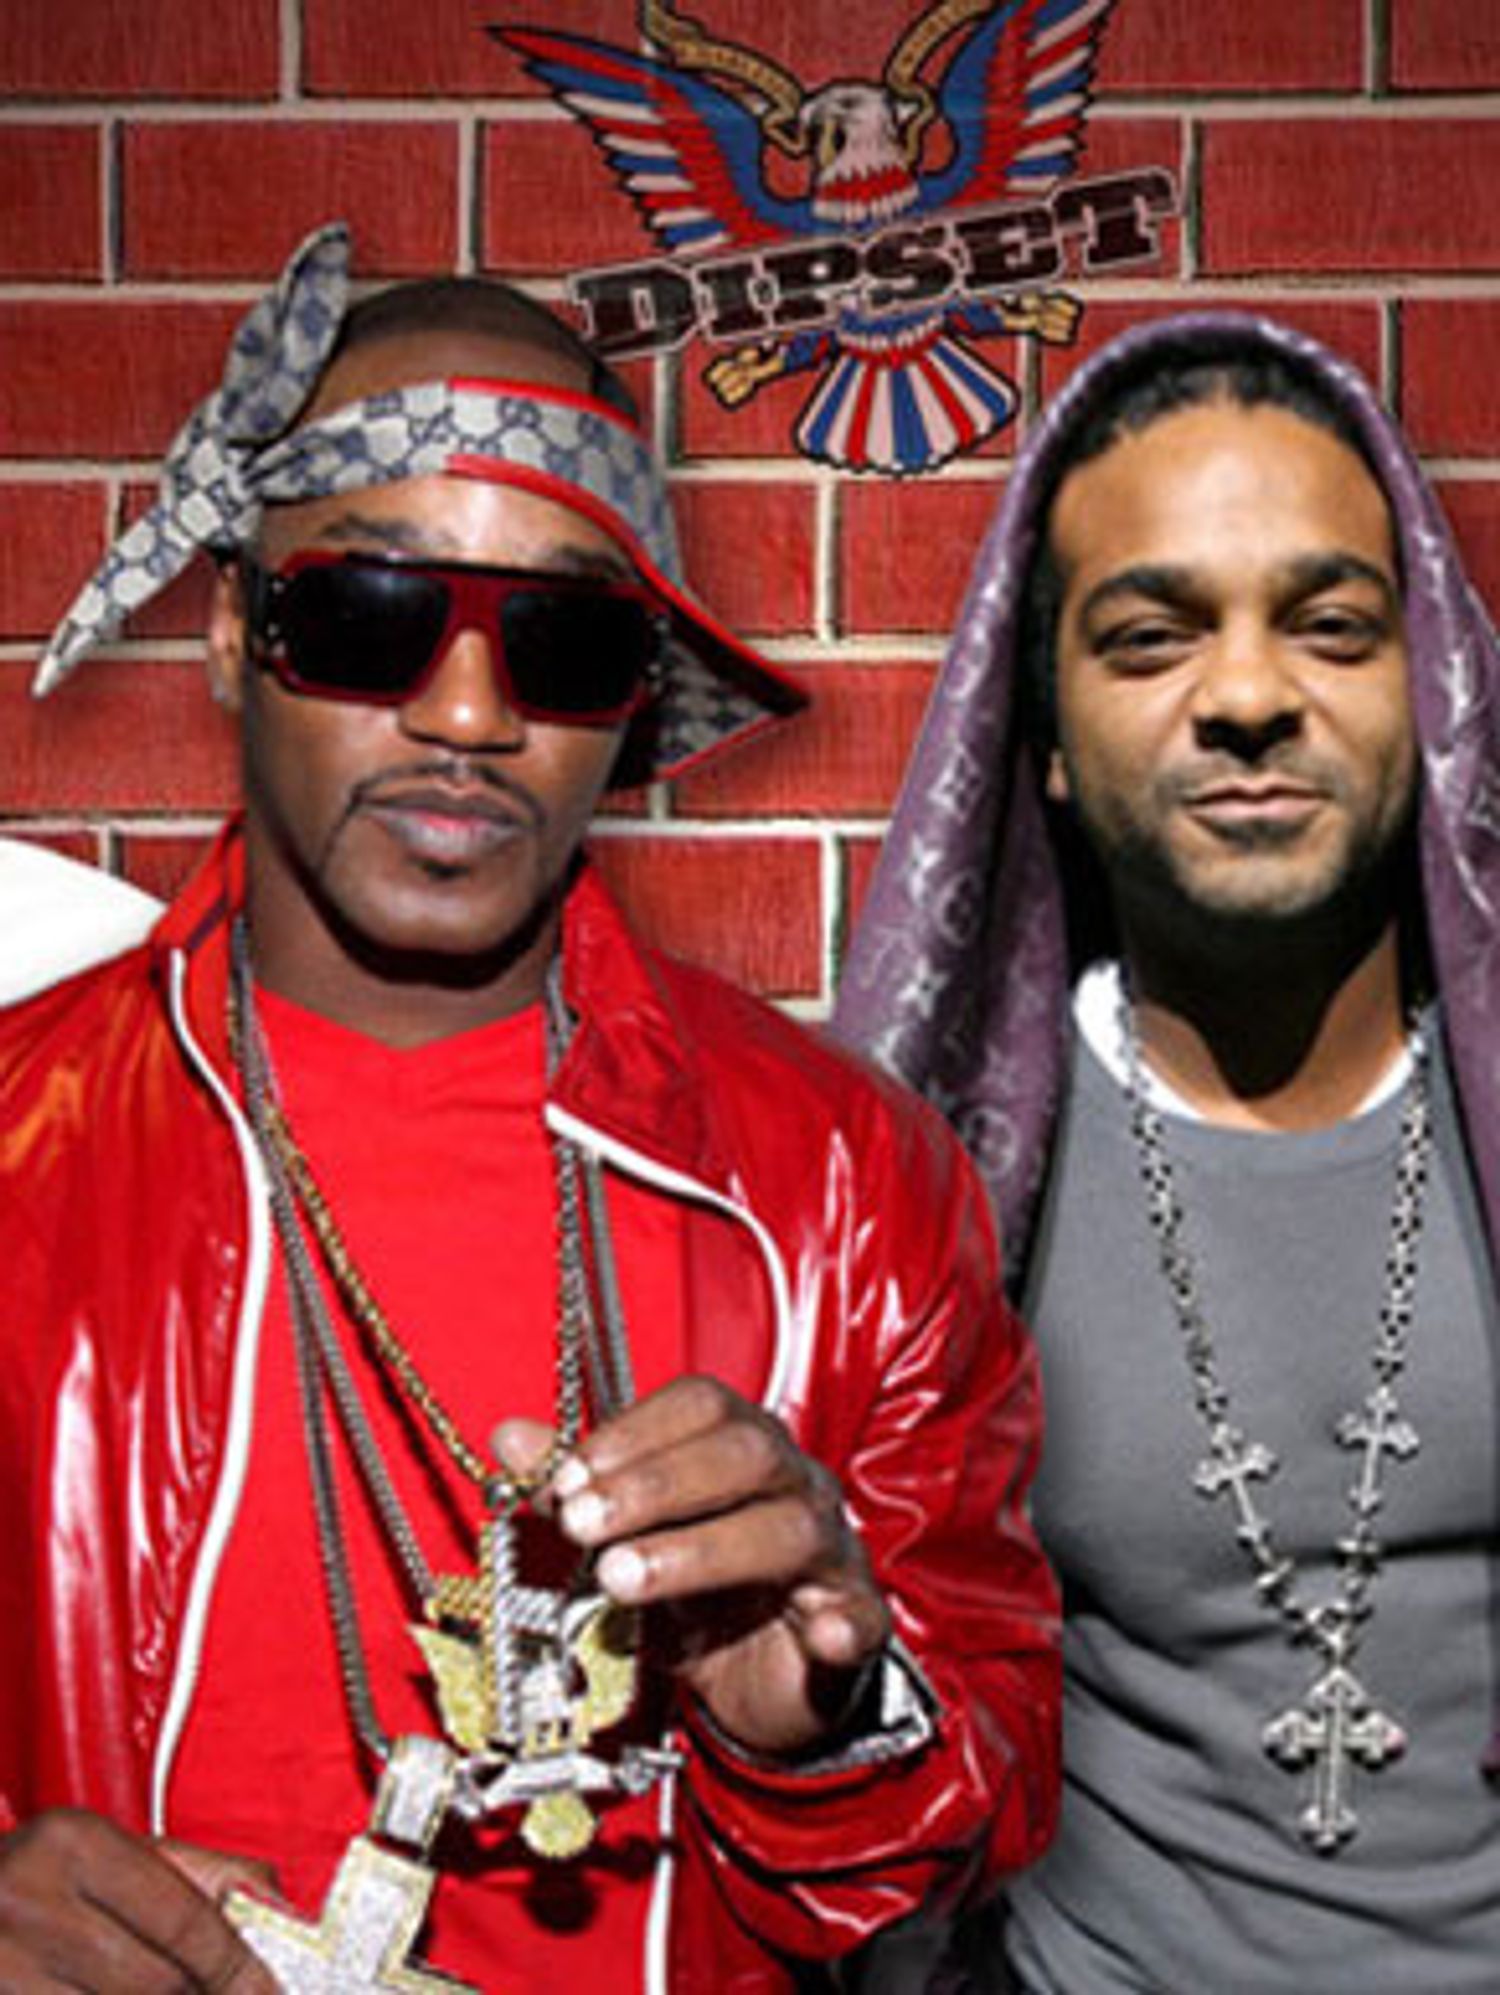 Dipset Is Back, So Here Are 6 Iconic Moments We Still Cherish 